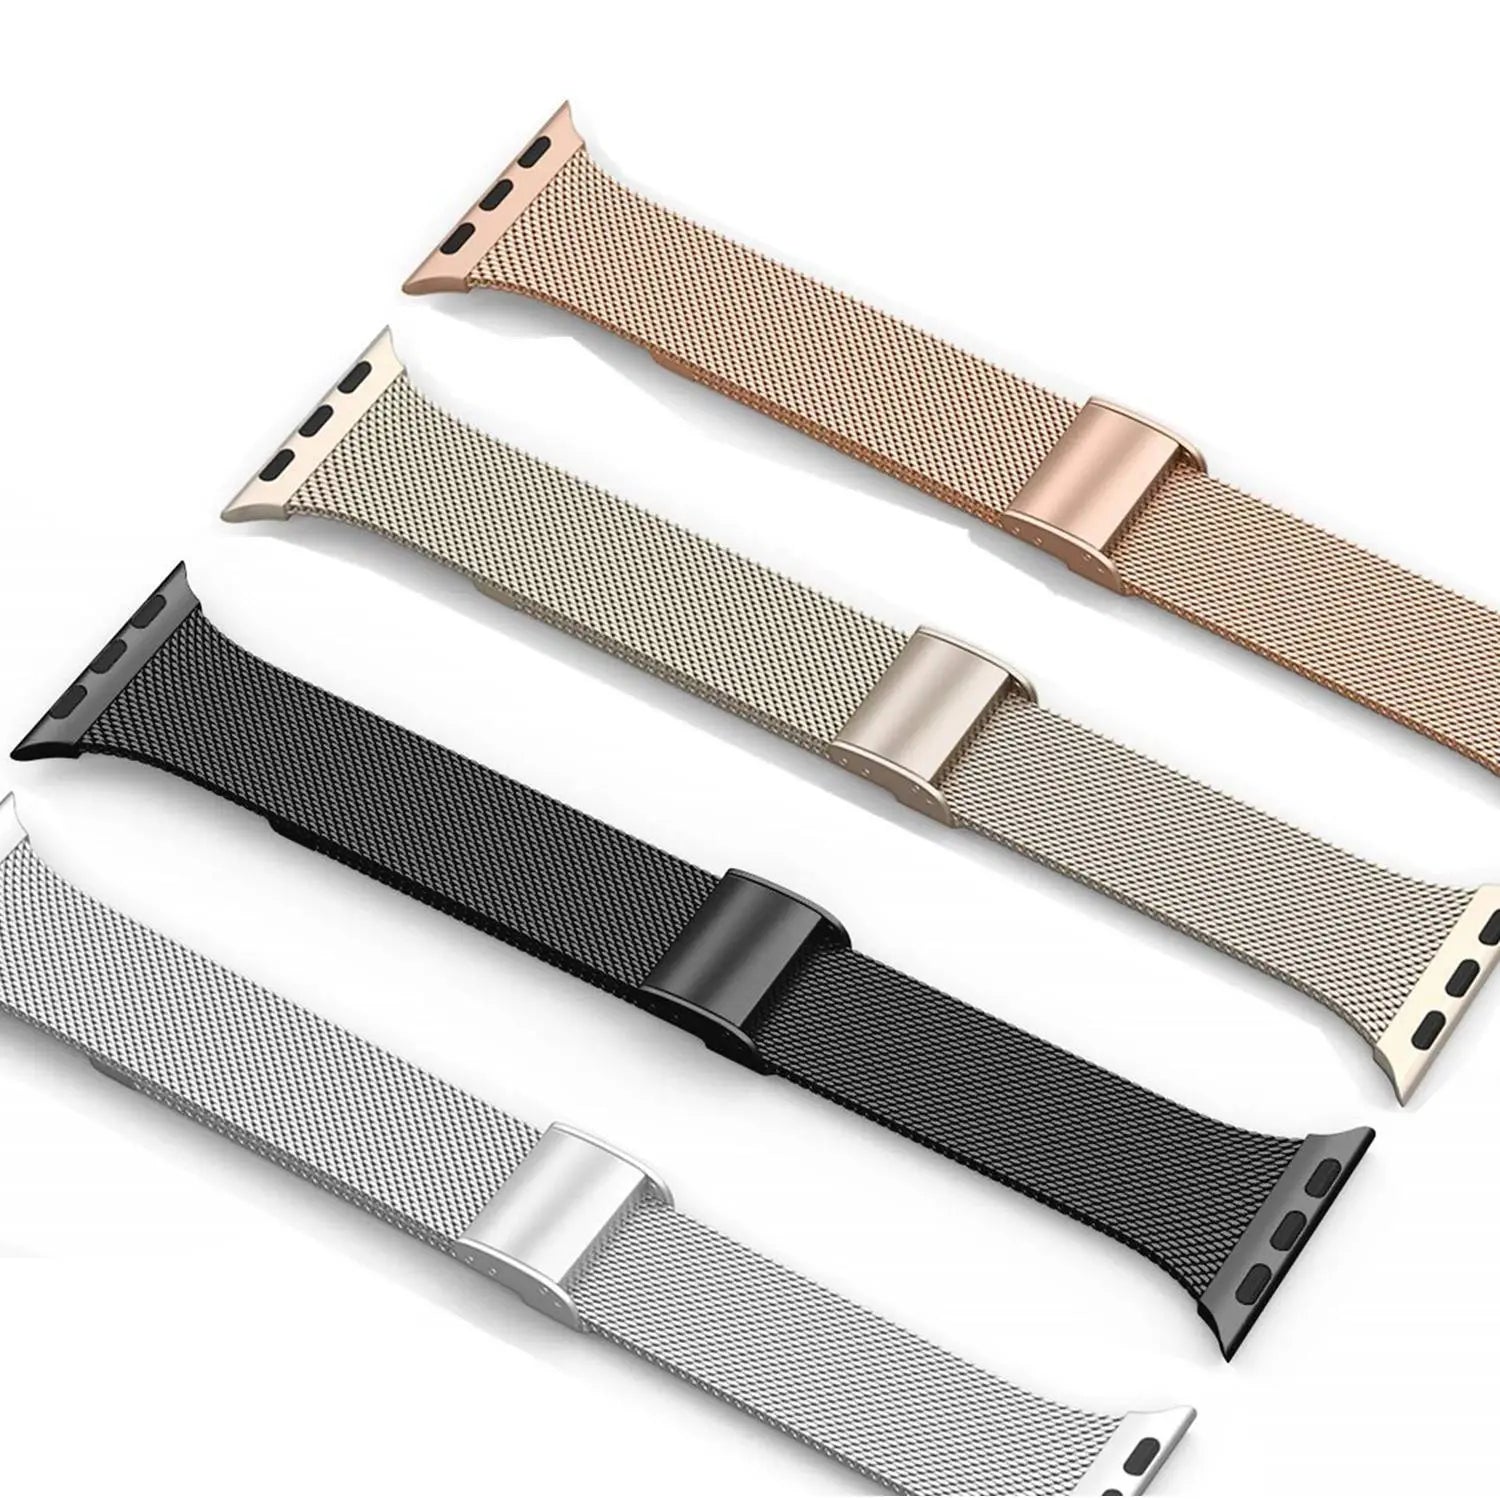 Premium Thin Stainless Steel Mesh Band For Apple Watch Series 7 41mm 45mm - Pinnacle Luxuries